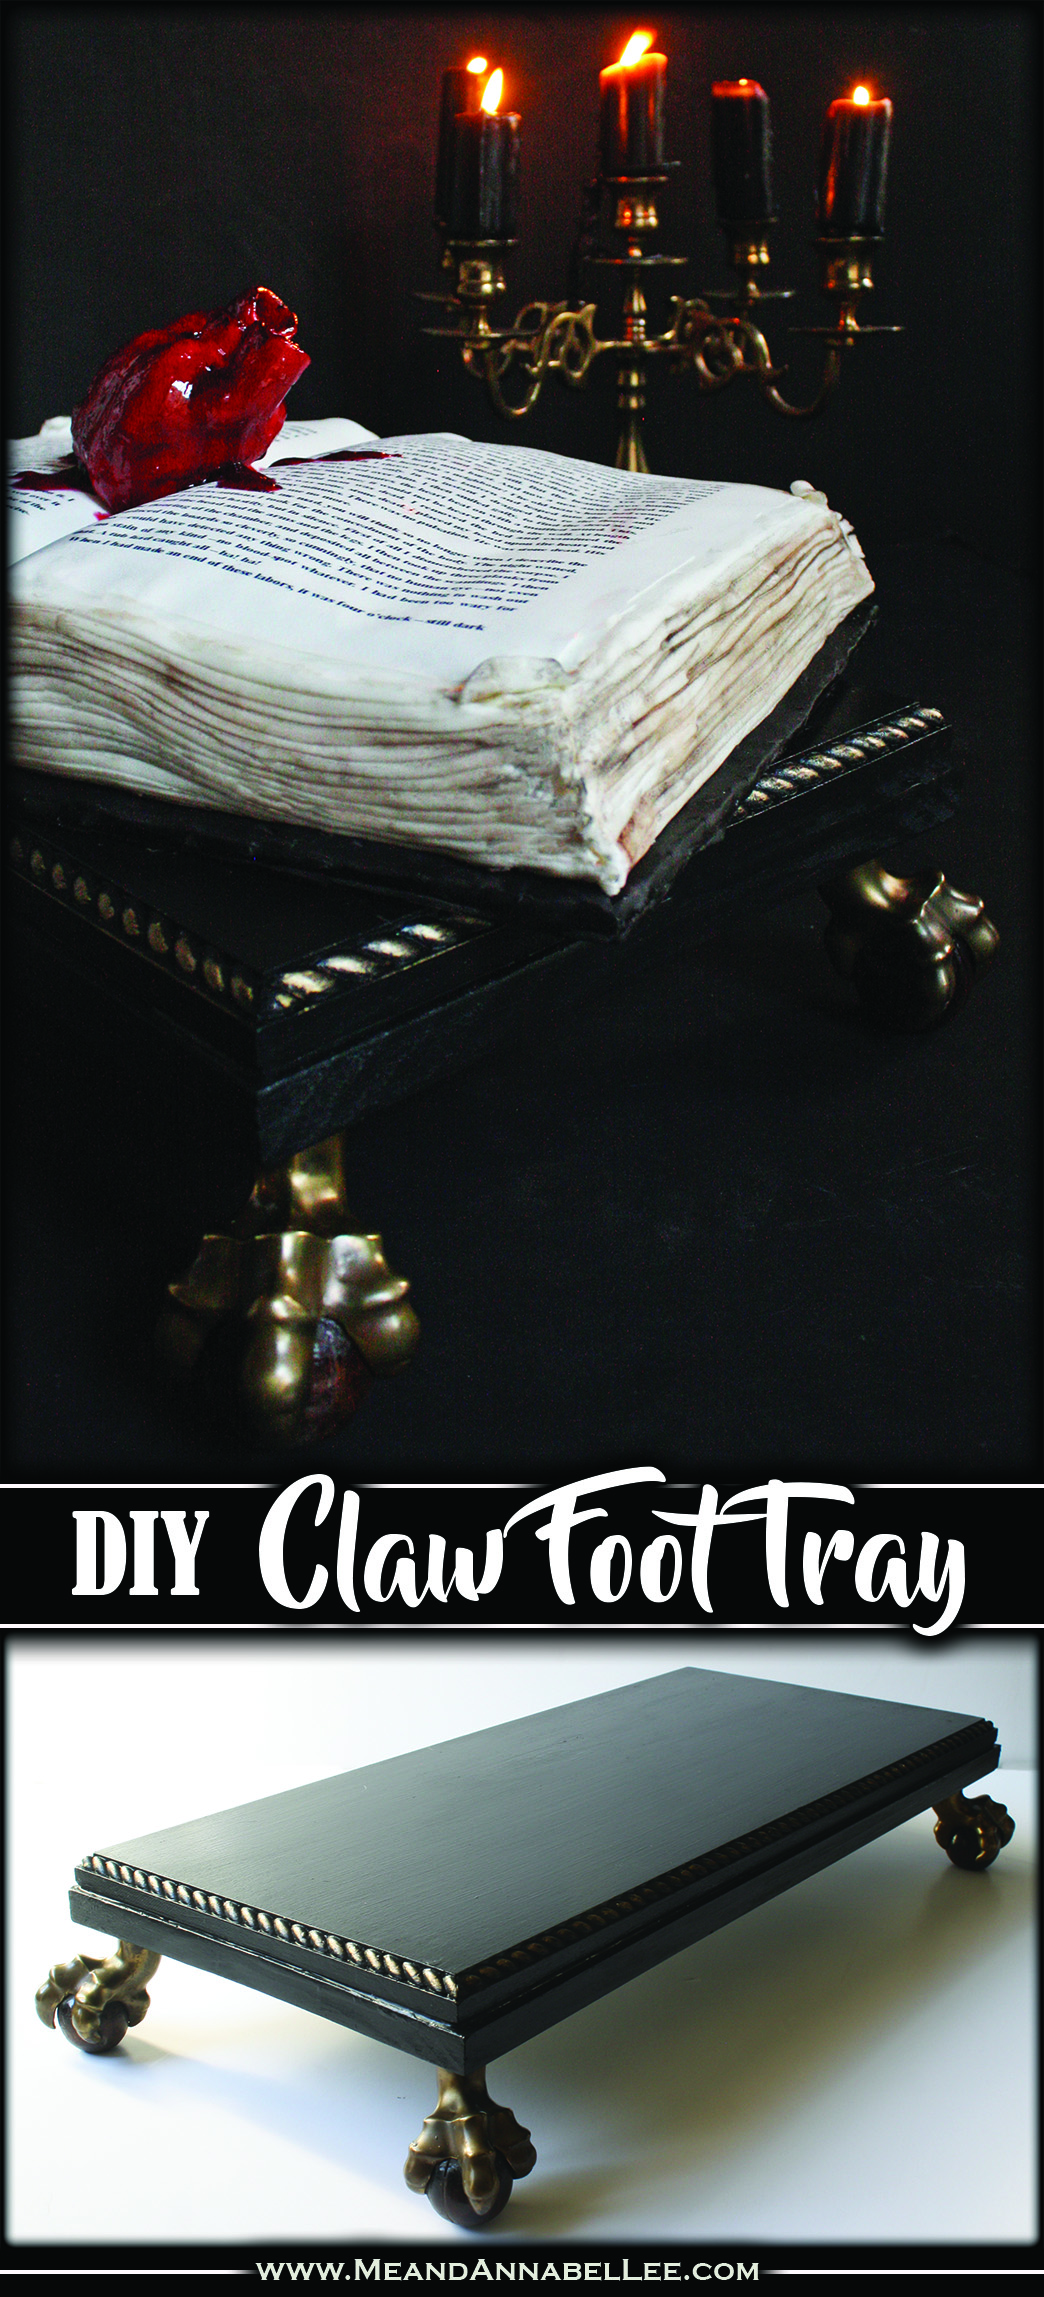 DIY Gothic Ball & Claw Foot Serving Tray | Goth It Yourself Tutorial | Wooden Server | Antique Home Décor | Black and Gold | Victorian Gothic | www.MeandAnnabelLee.com